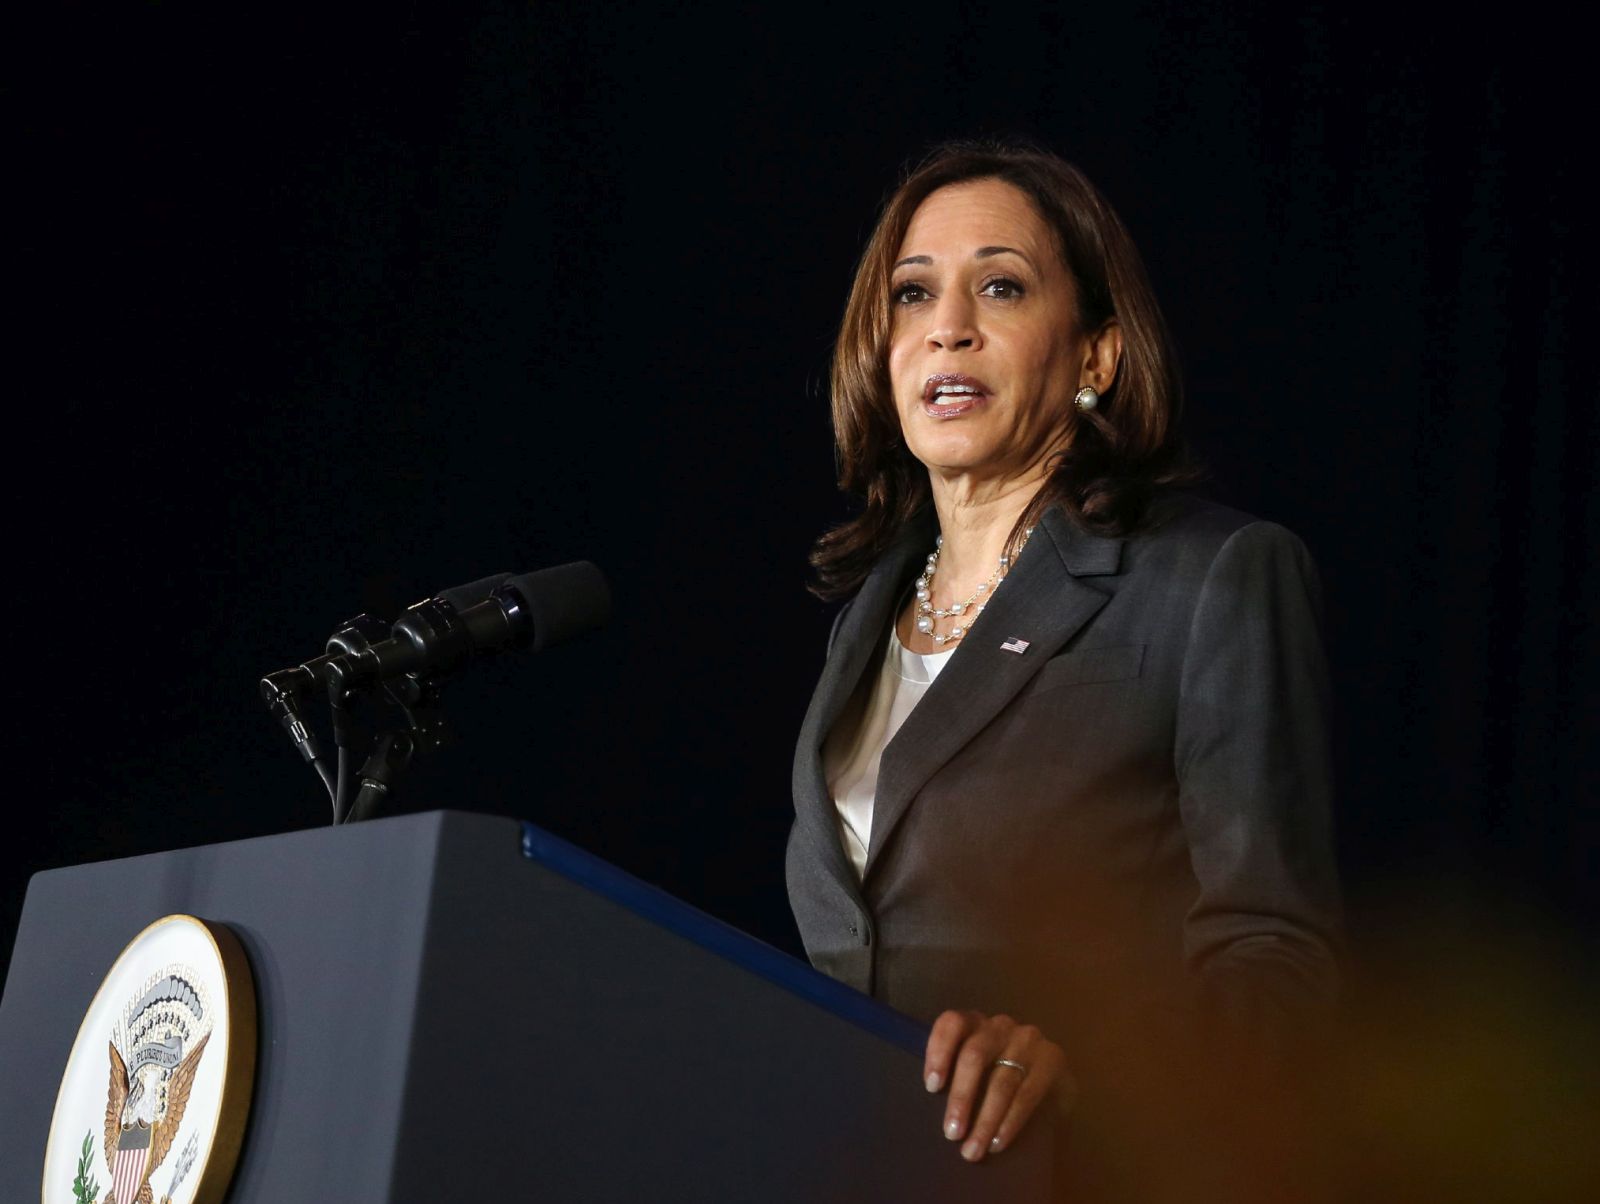 epa09427014 US Vice President Kamala Harris delivers a speech at Gardens by the Bay in Singapore, 24 August 2021. US Vice President Kamala Harris is on an official three-day visit to Singapore before heading to Vietnam on 24 August 2021.  EPA/ONG WEE JIN / SPH SINGAPORE OUT